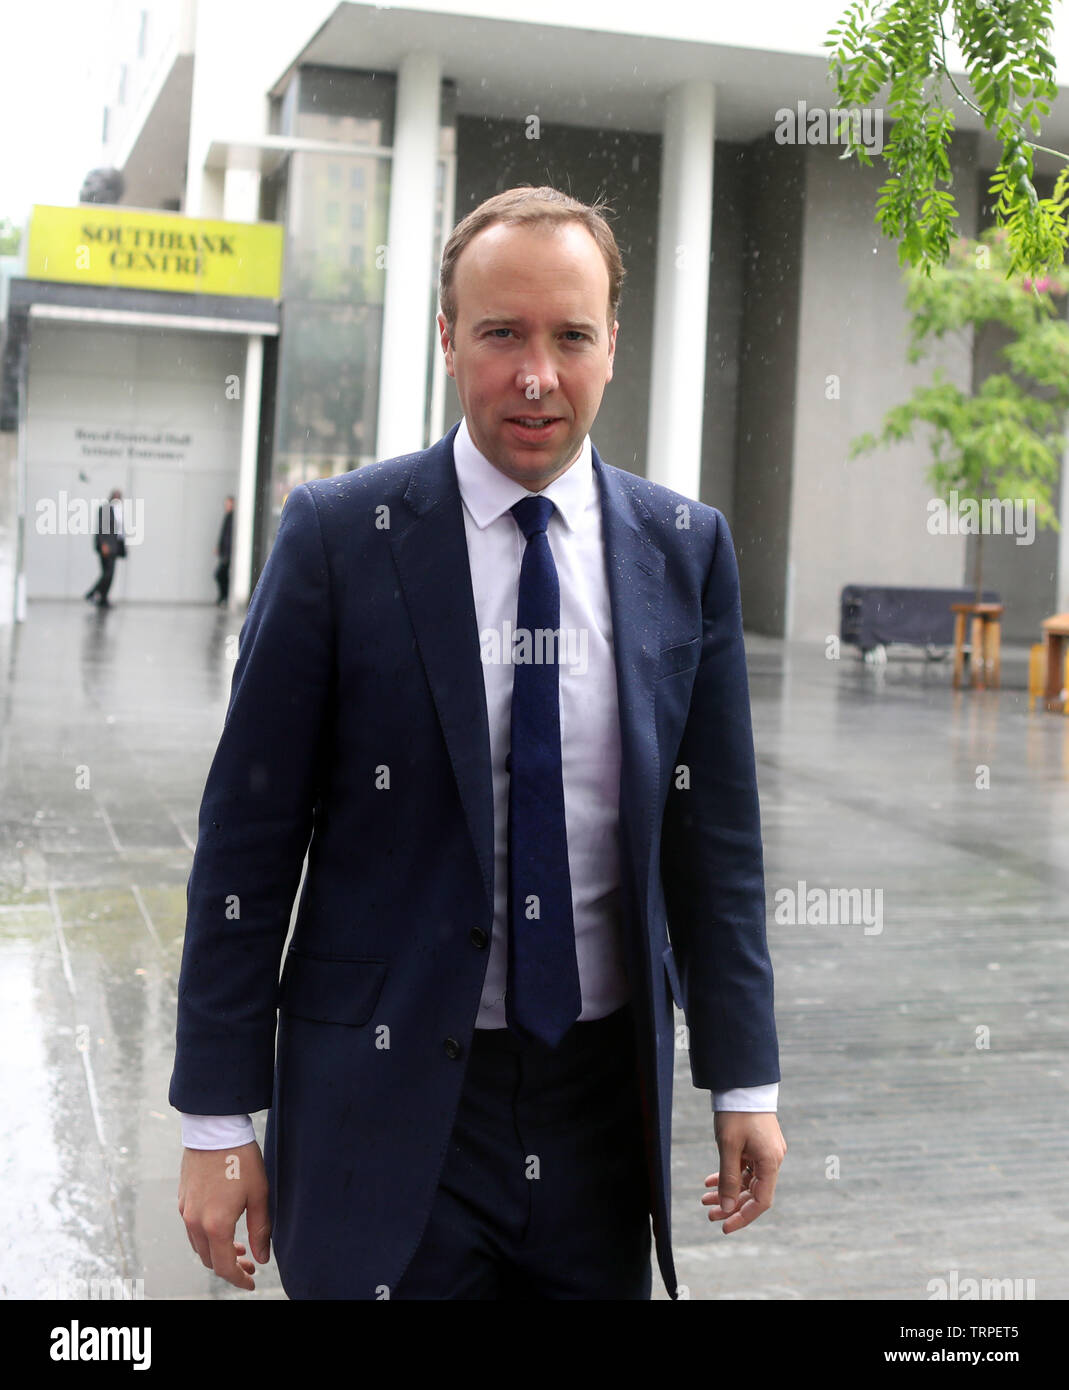 Pic shows: Braving the rain without an umbrella squeaky clean Matt Hancock leaves his press launch at the Royal Festival Hall today  with the   “ Stock Photo